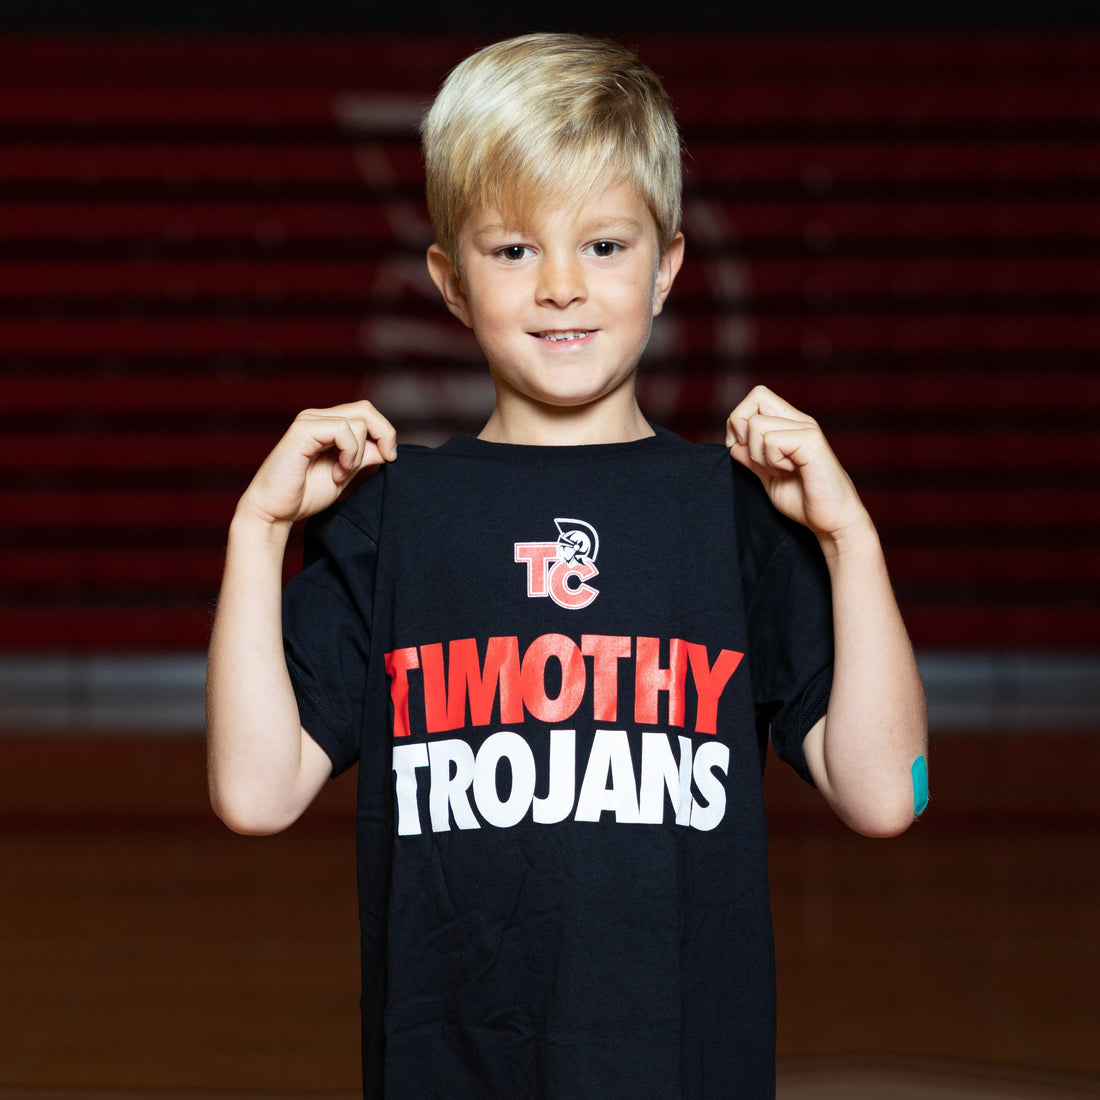 Youth Timothy Trojans T-Shirt (Black or Red)